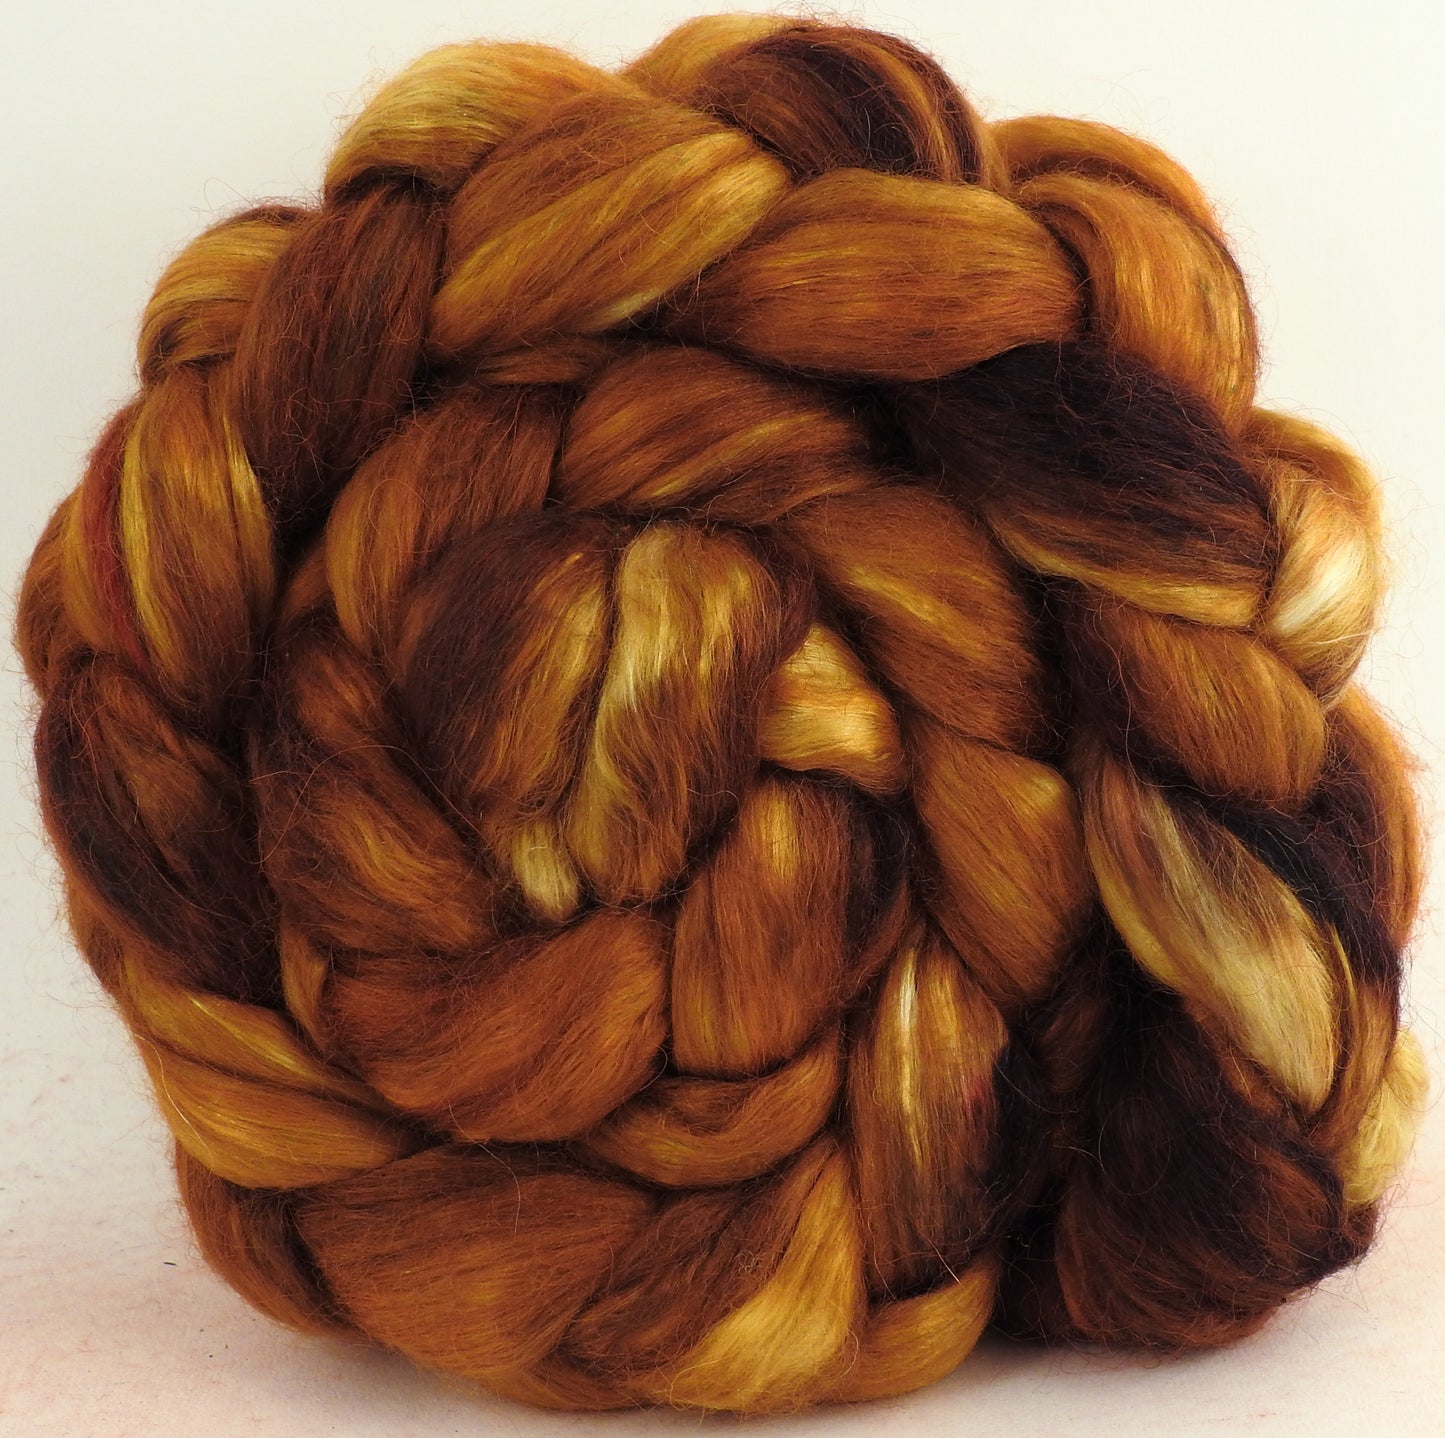 Strong Honey - Wensleydale/ Mulberry silk roving (65/35)